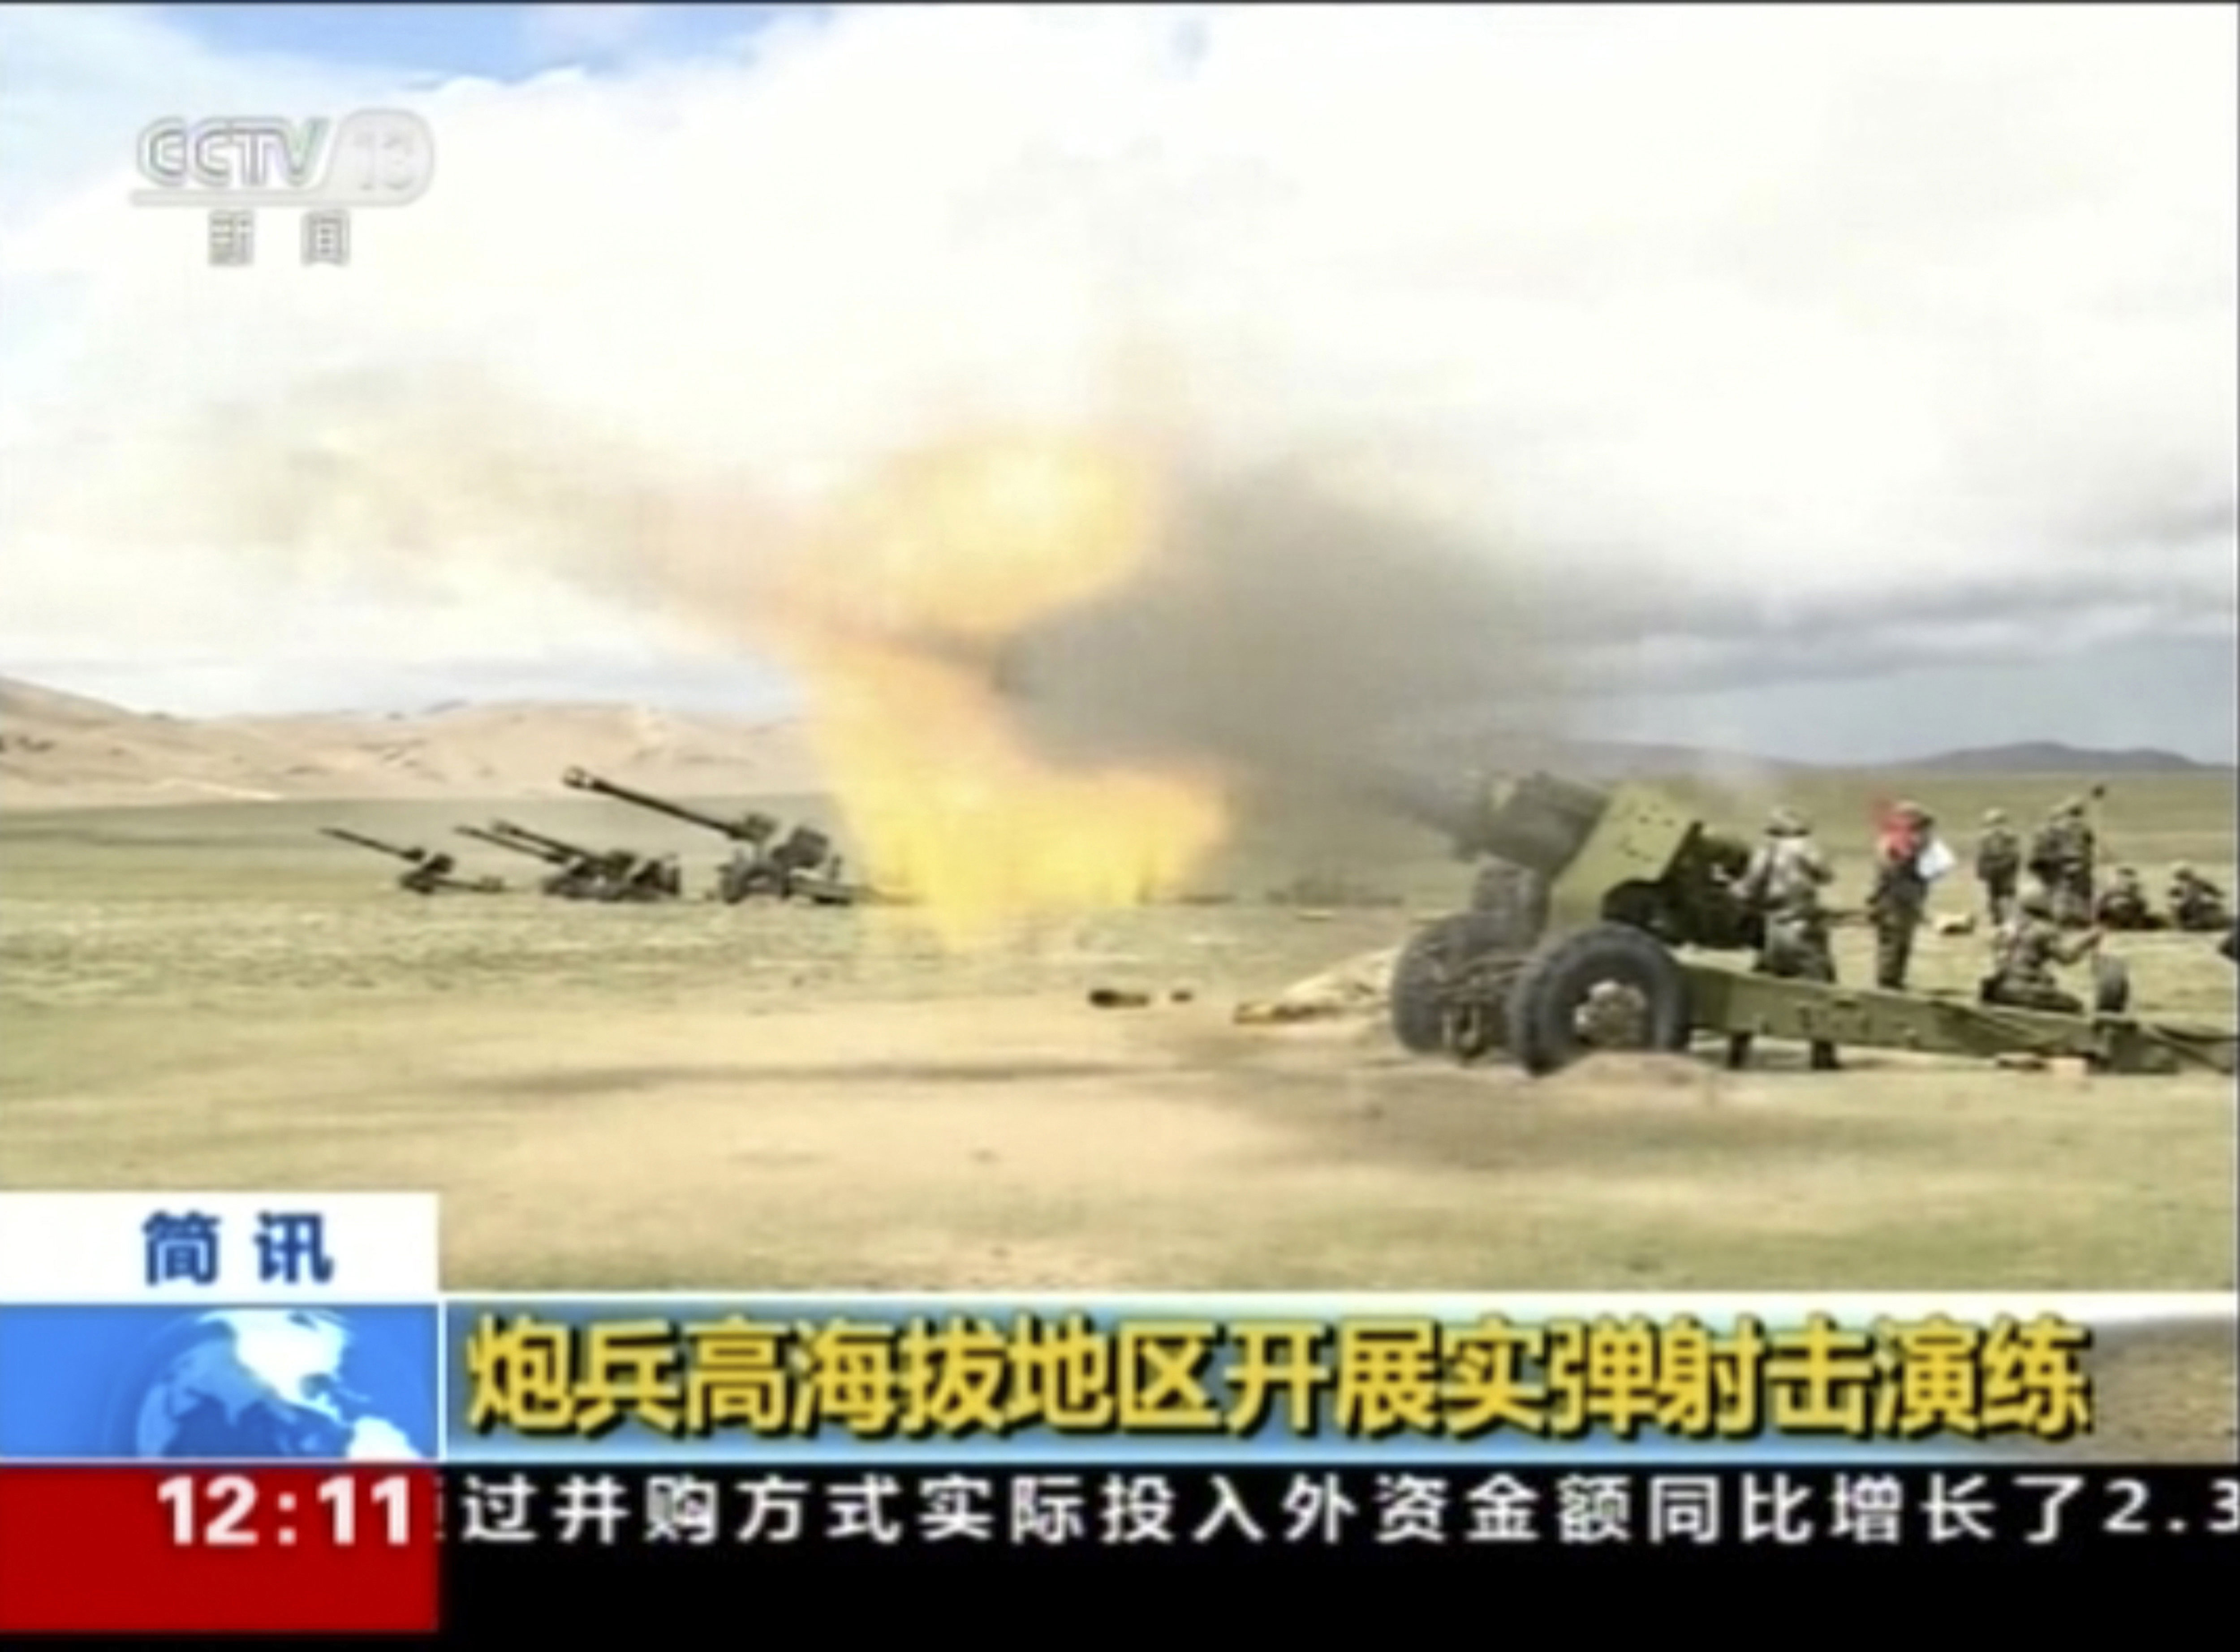 In this image taken from a recent video footage run by China's CCTV on Friday, Aug 4, 2017 via AP Video, artillery guns fire during a live-fire drill by the Chinese army in China's Tibet Autonomous Region that border India.